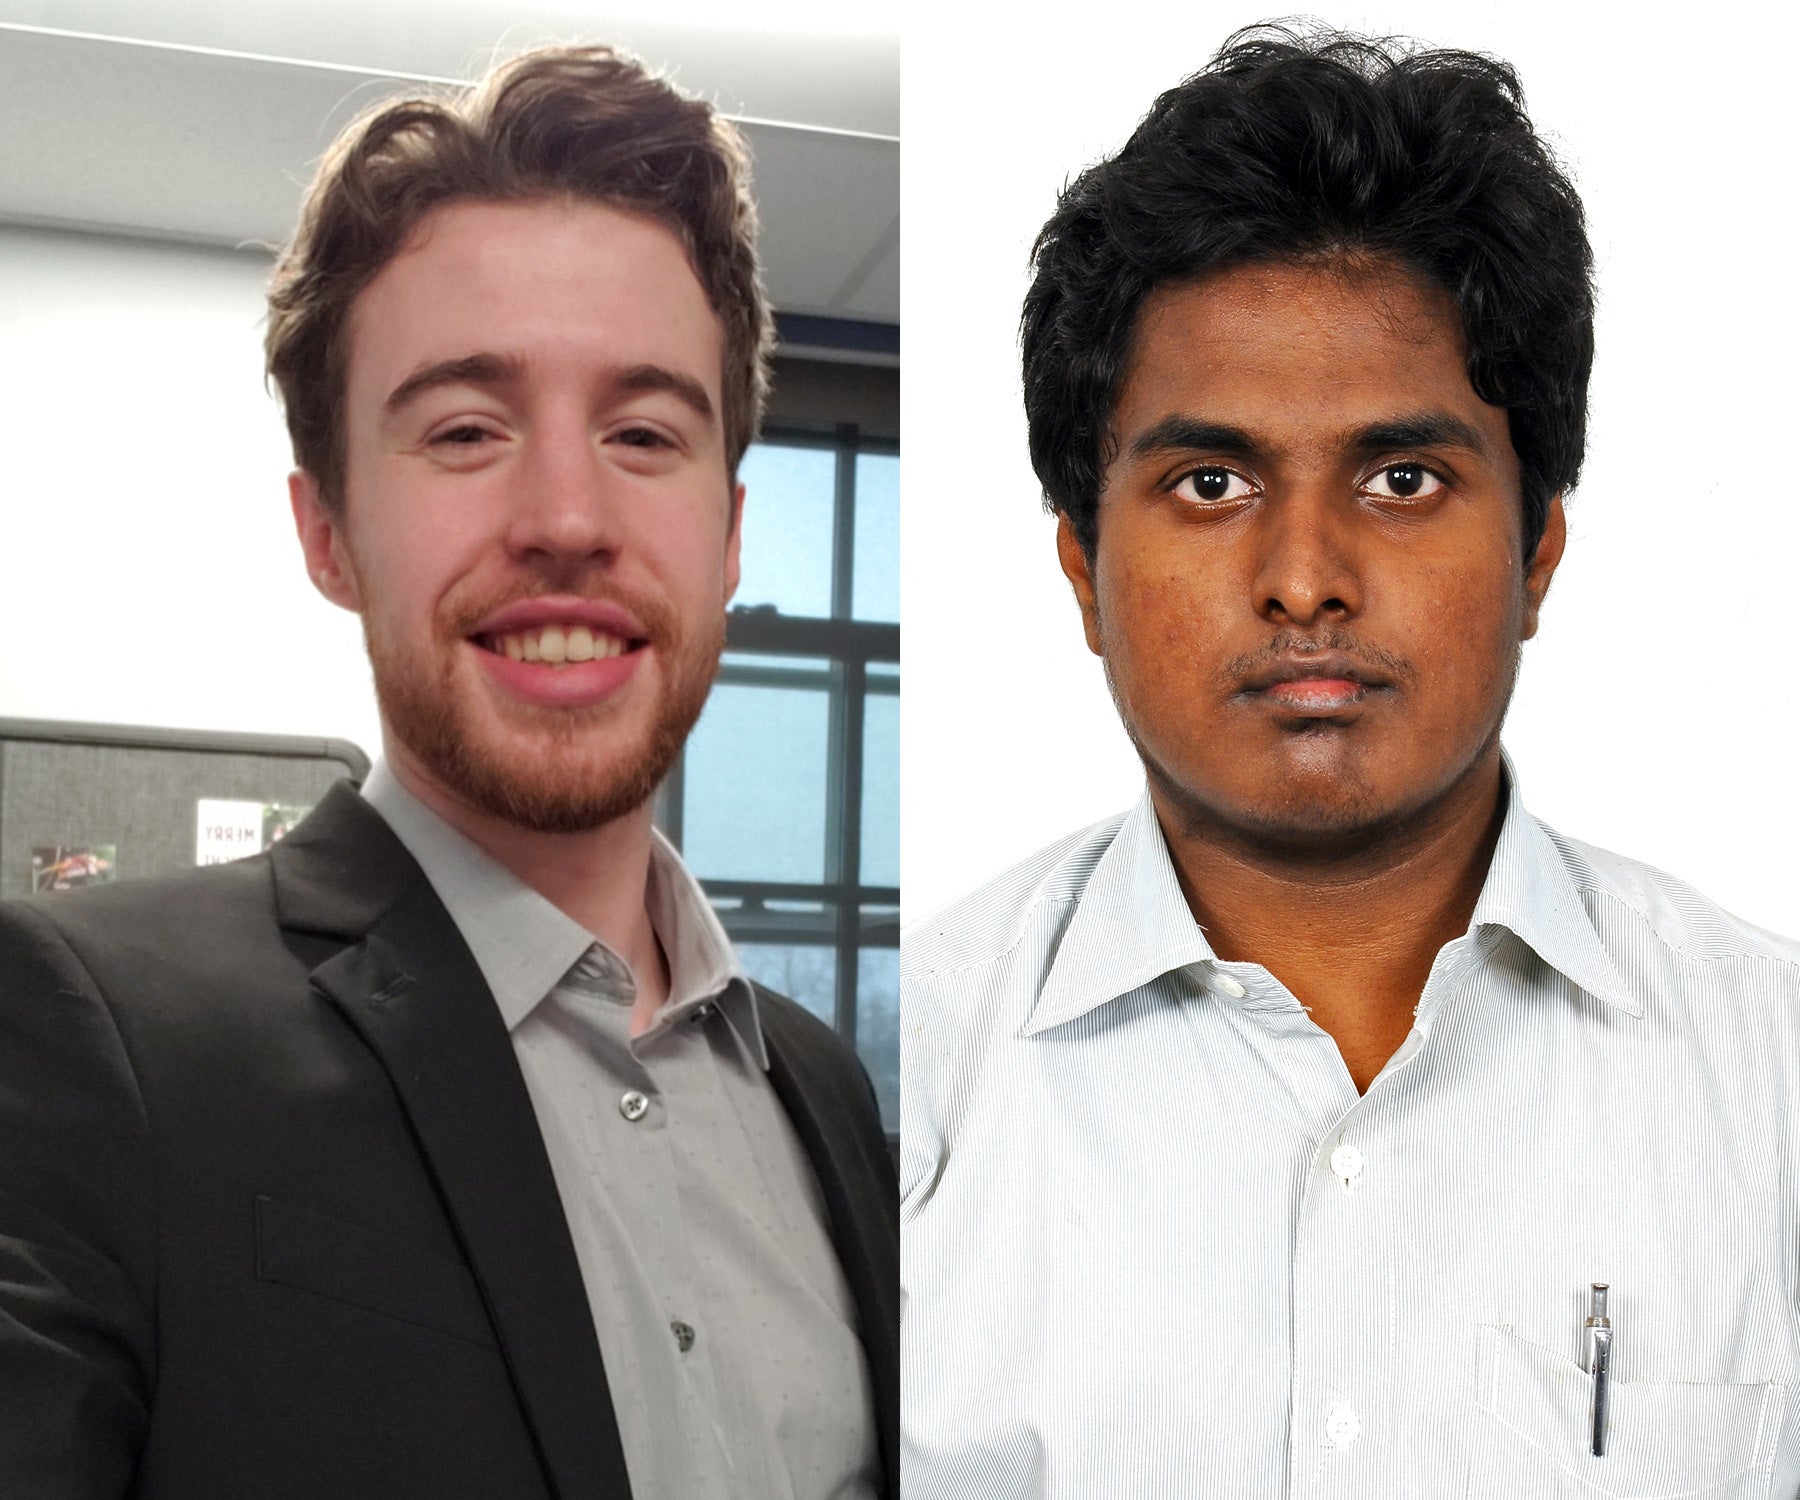 Dylan Kennedy and electrical engineering graduate student Vignesh Ravichandran